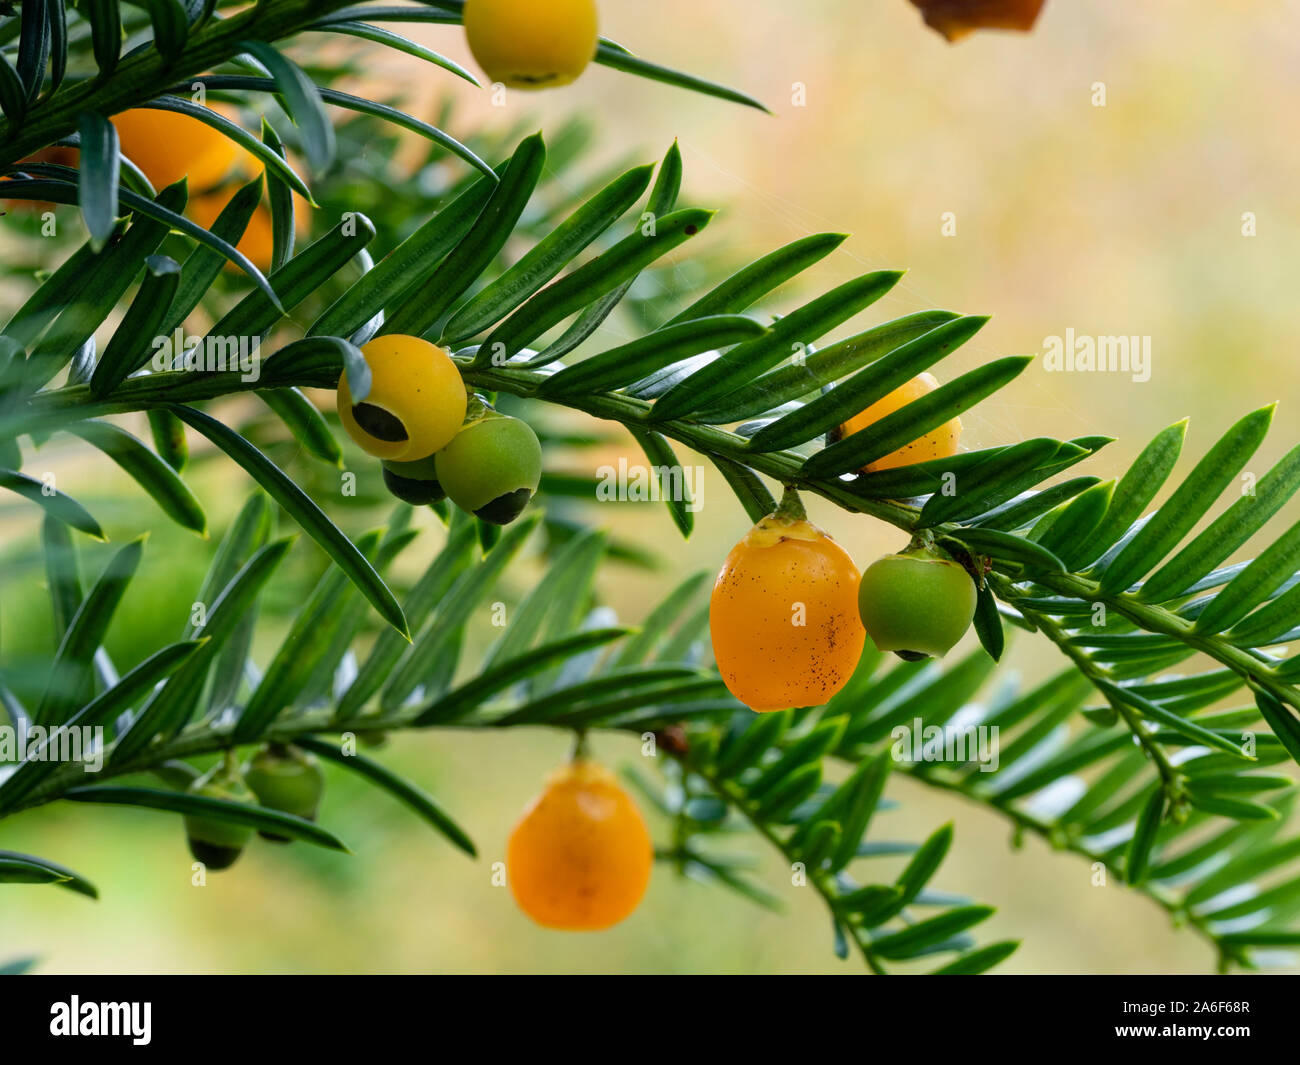 Poisonous yellow autumn berries of the evergreen yew tree, Taxus baccata 'Lutea' Stock Photo